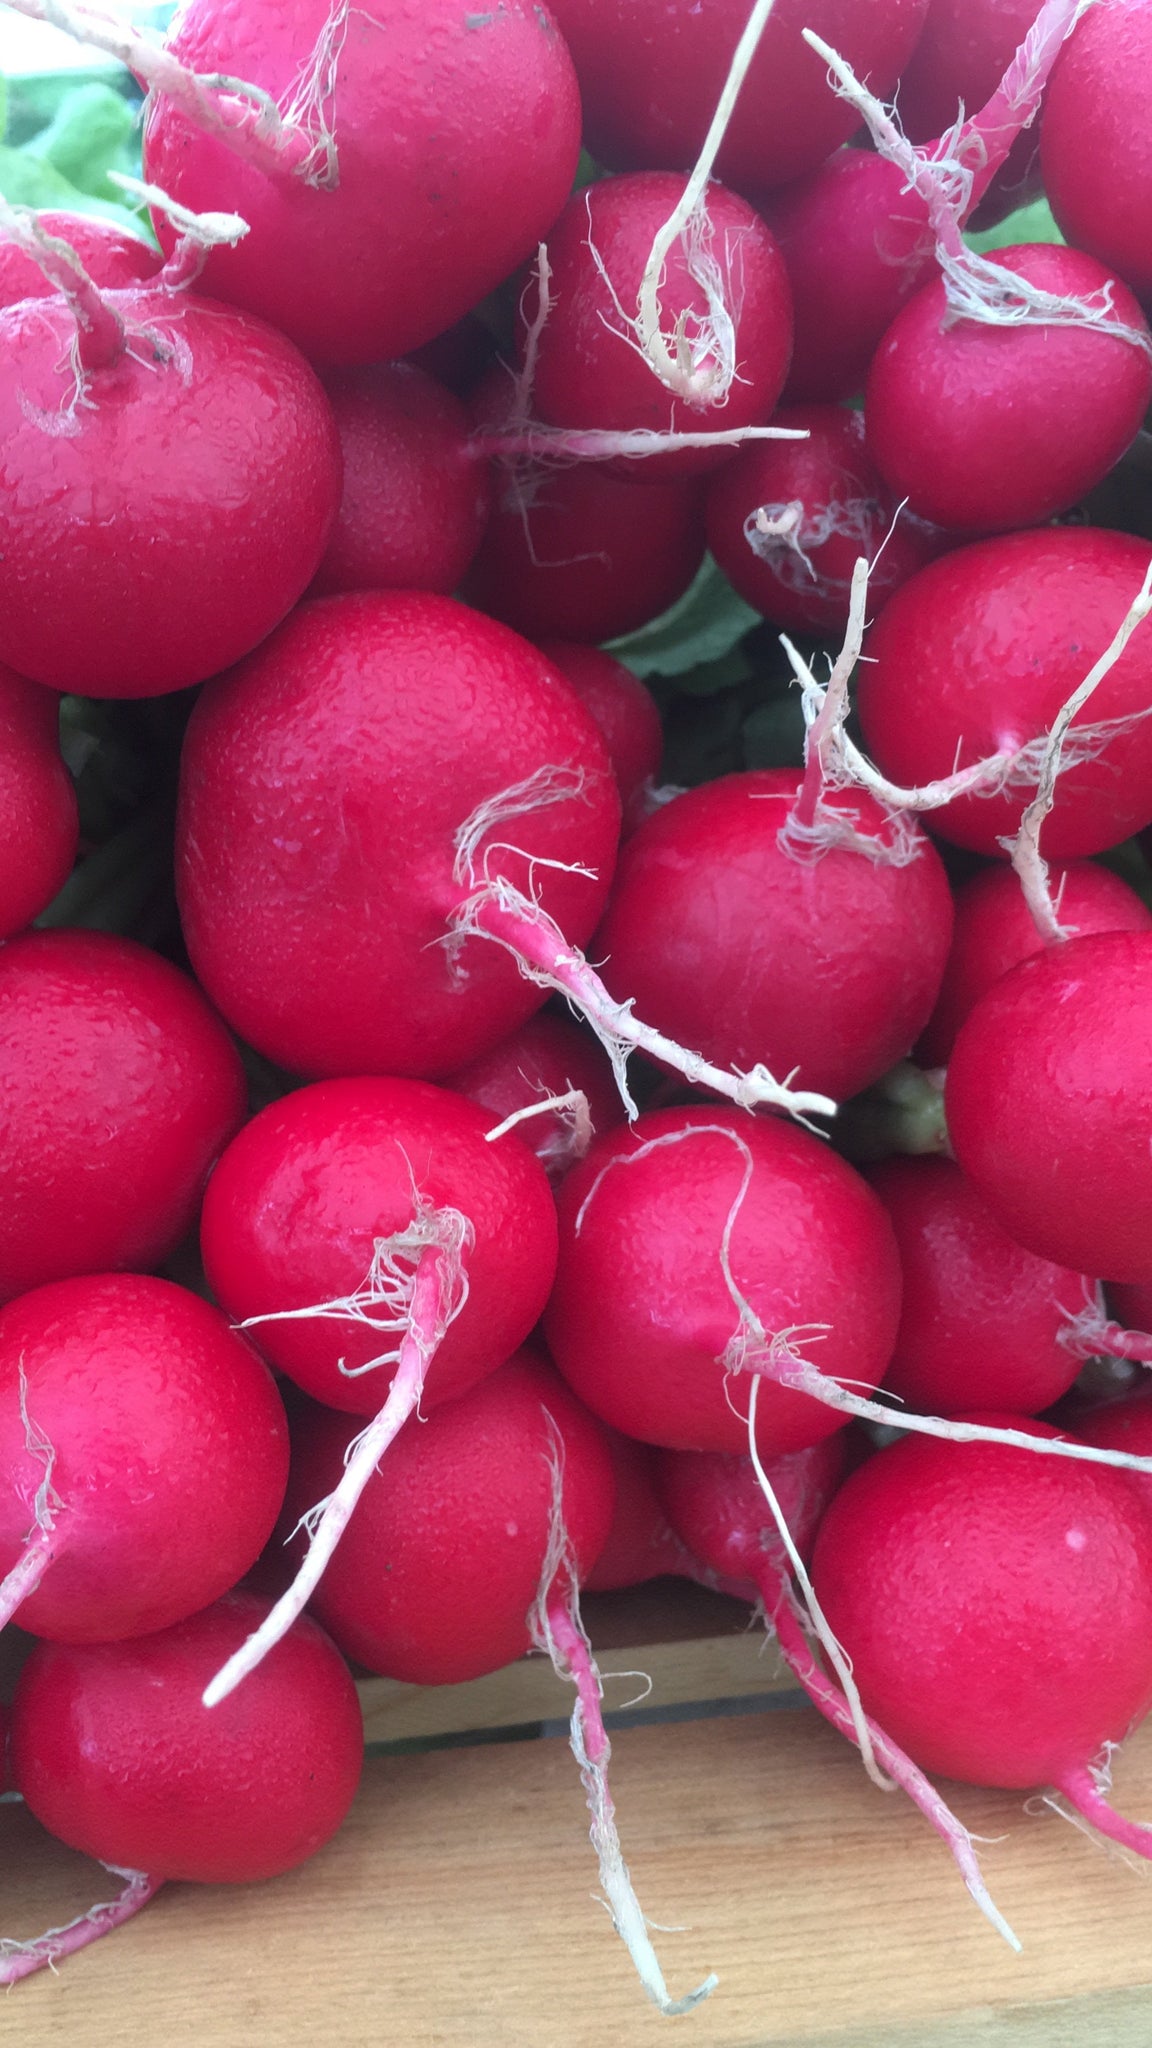 POS Red Radishes - 1 Bunch